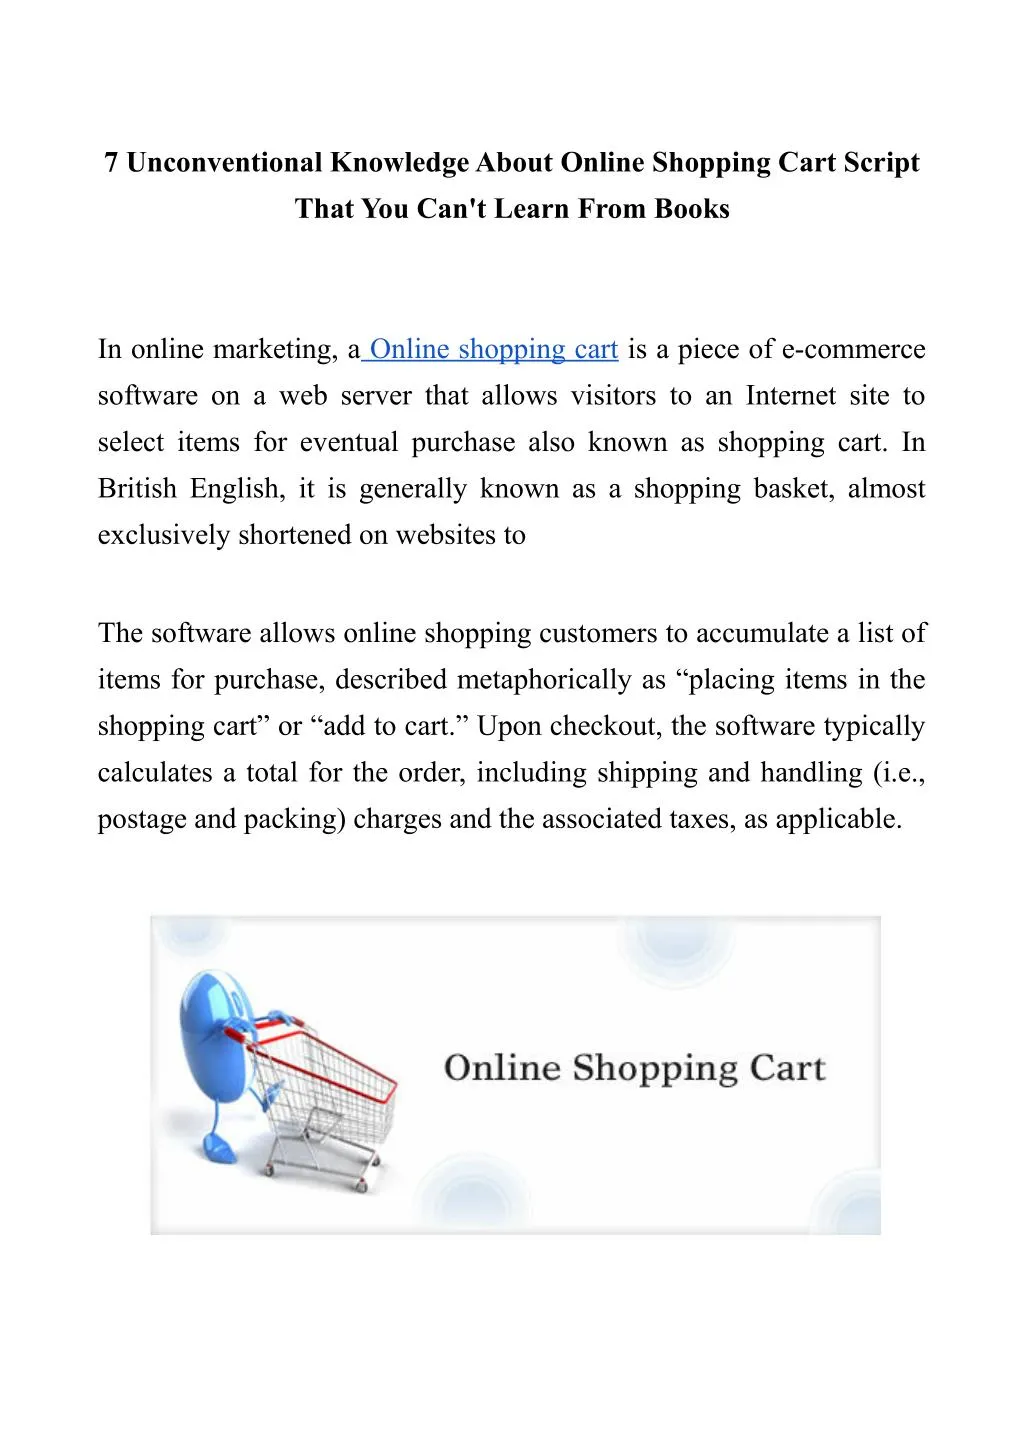 7 unconventional knowledge about online shopping